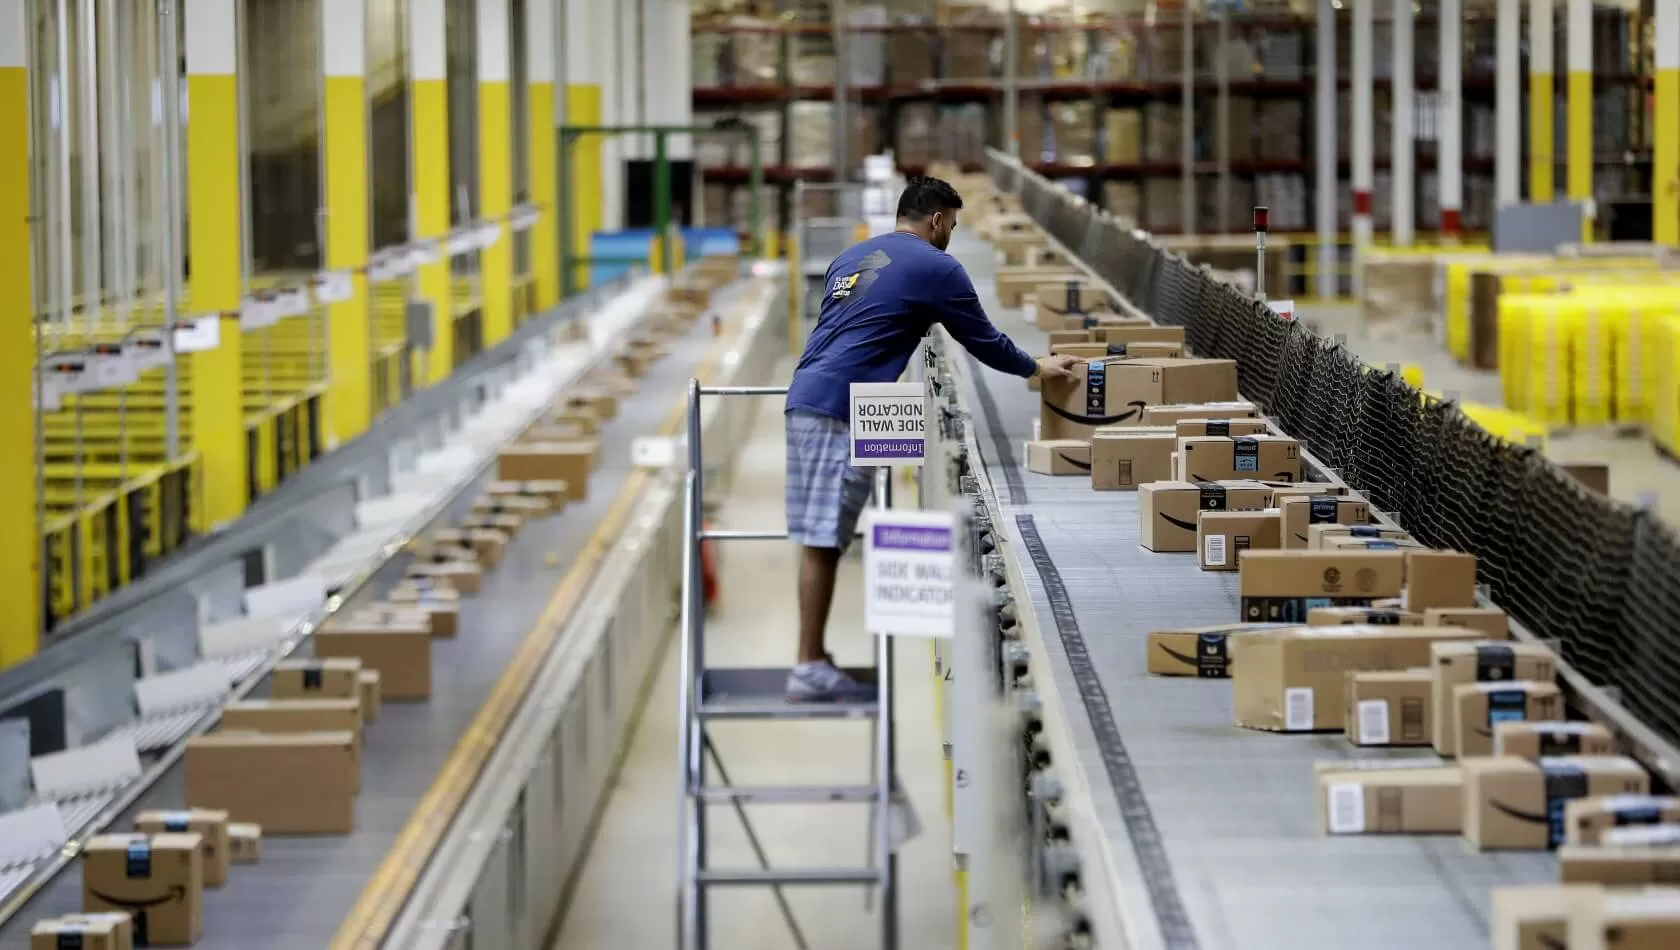 Amazon aims to hire 100,000 employees to keep up with demand